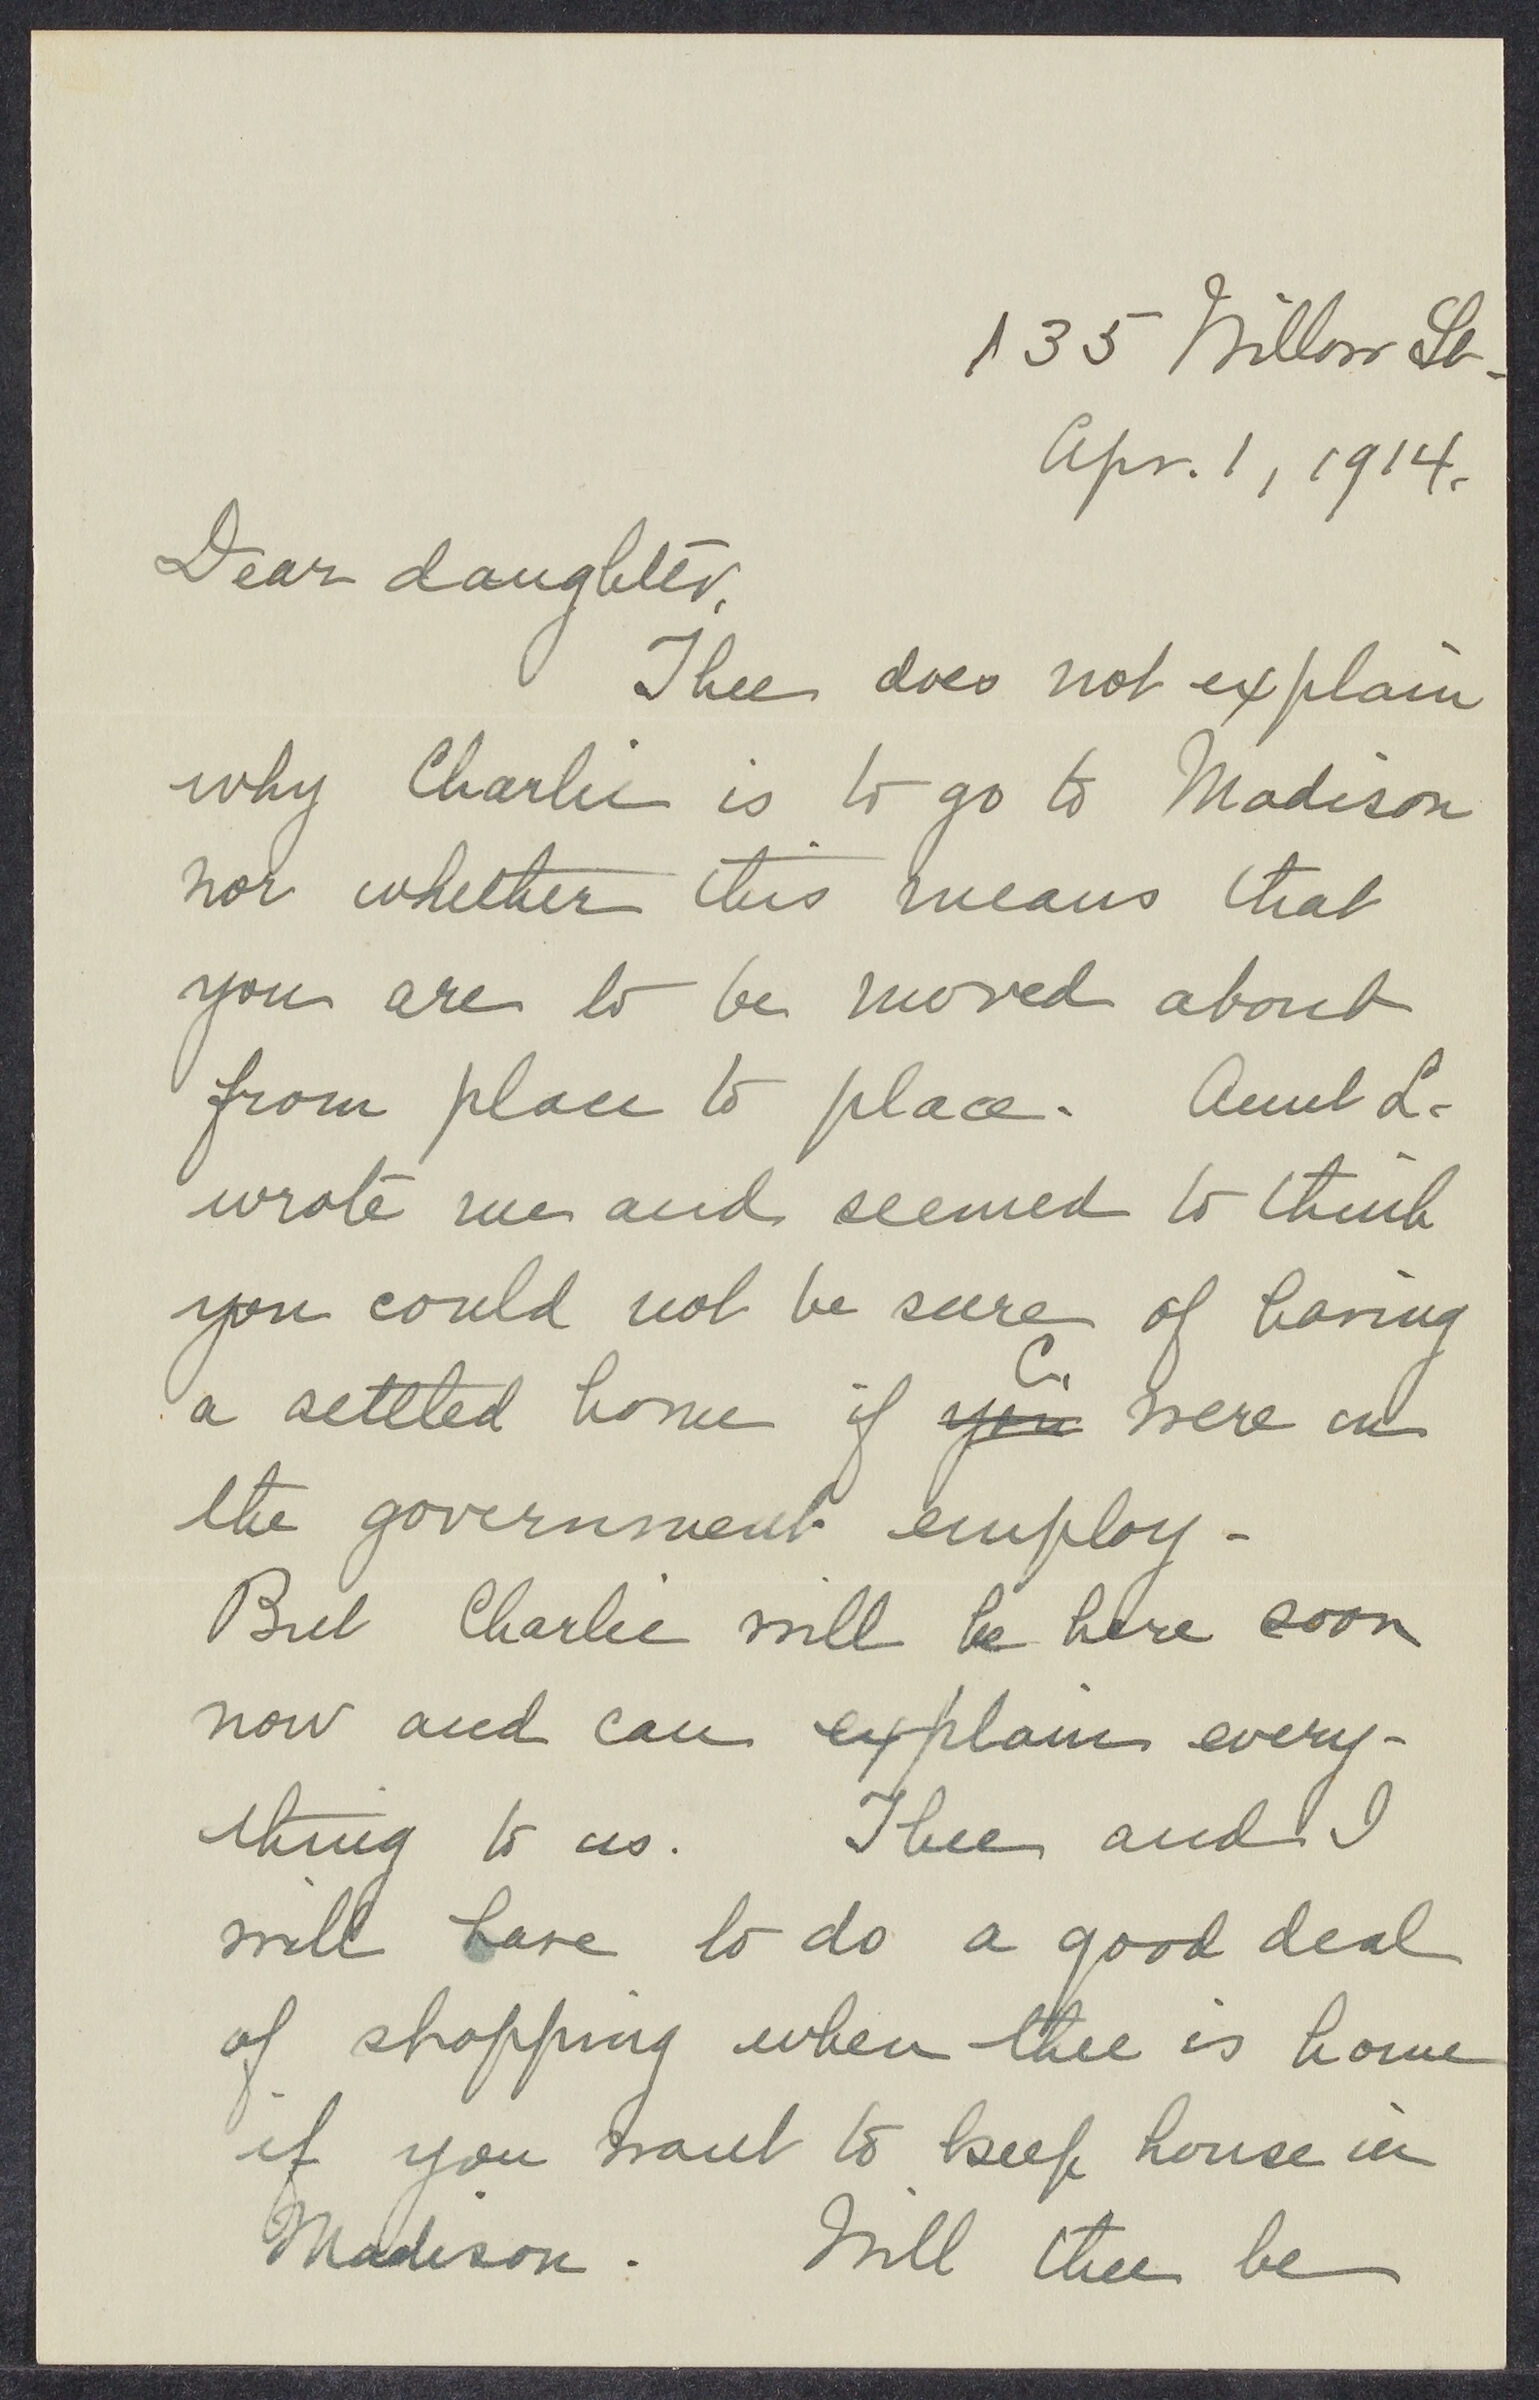 Letters from Eleanor Stabler Brooks's parents to Eleanor Stabler Brooks, April-June, 1914